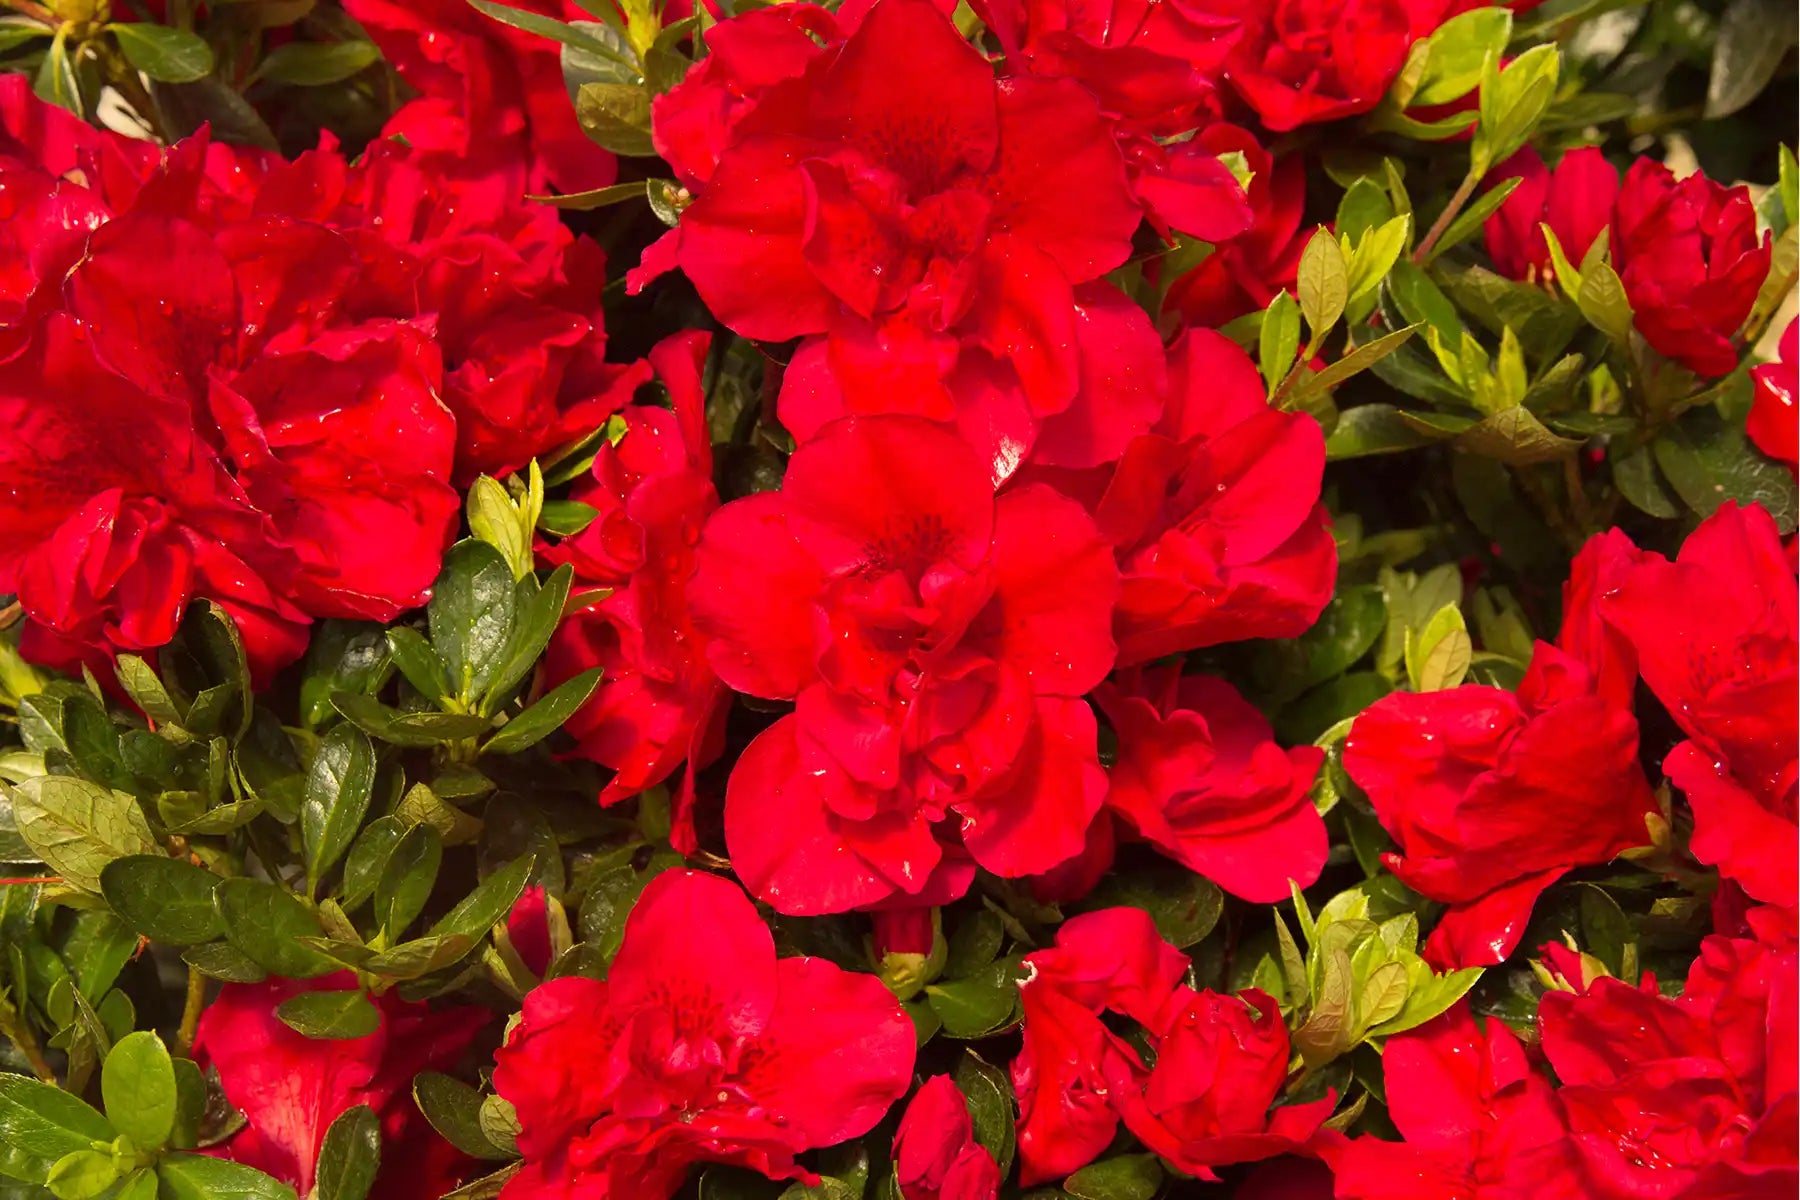 Autumn Bonfire™ Azalea fills the visual space with its eye-catching, blazing-red flowers throughout the summer and into the autumn.